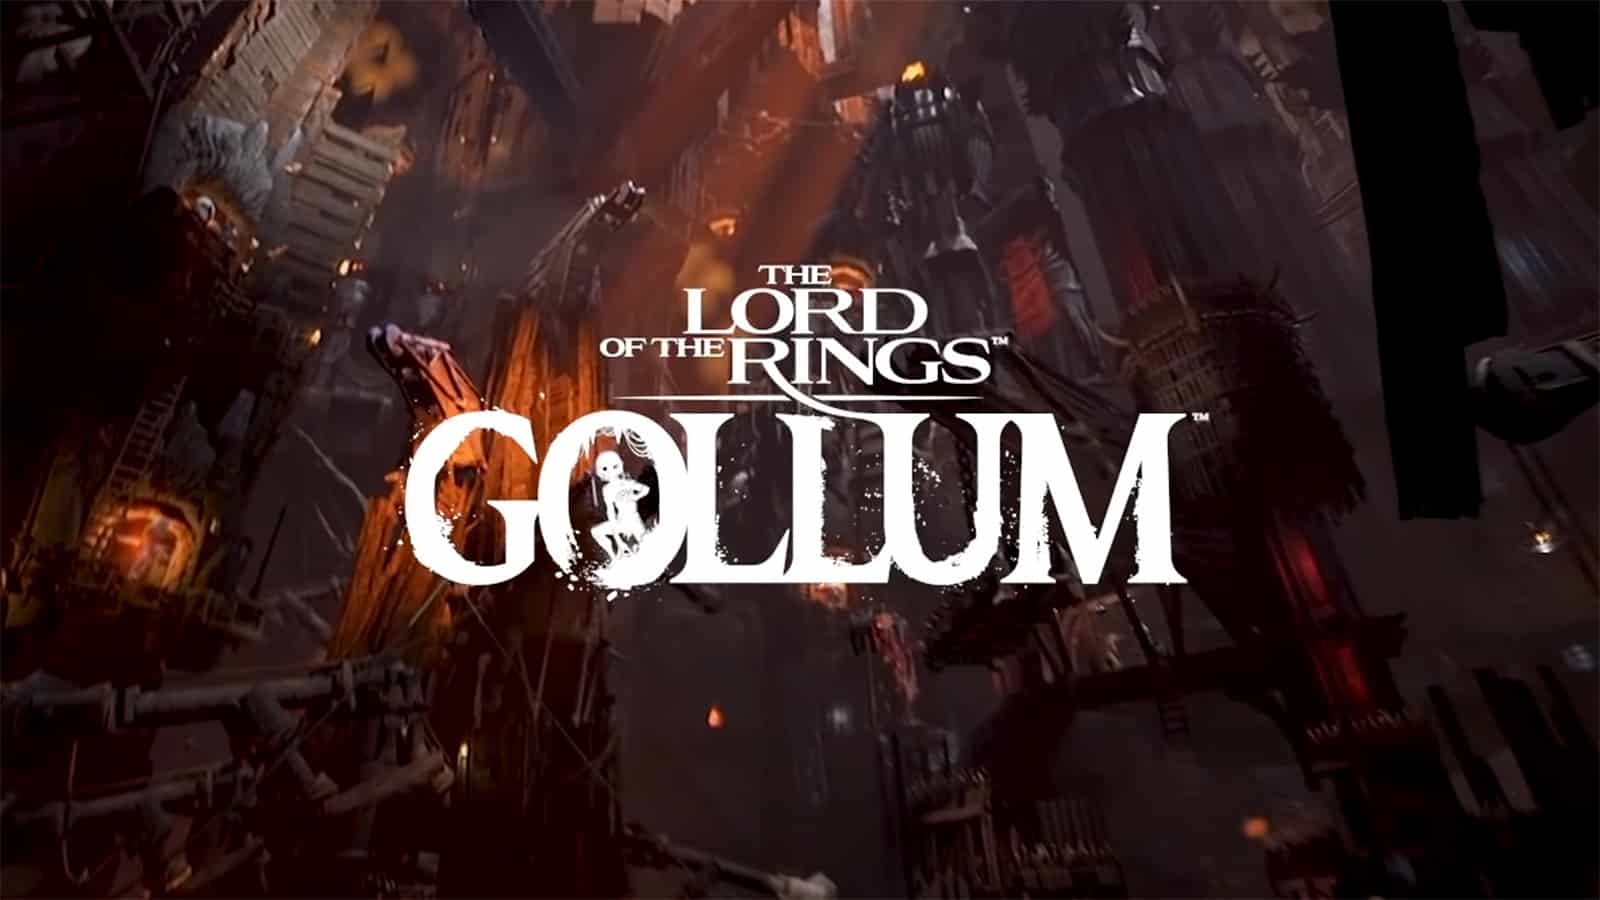 An image of a location in game with the Lort of The Rings Gollum logo